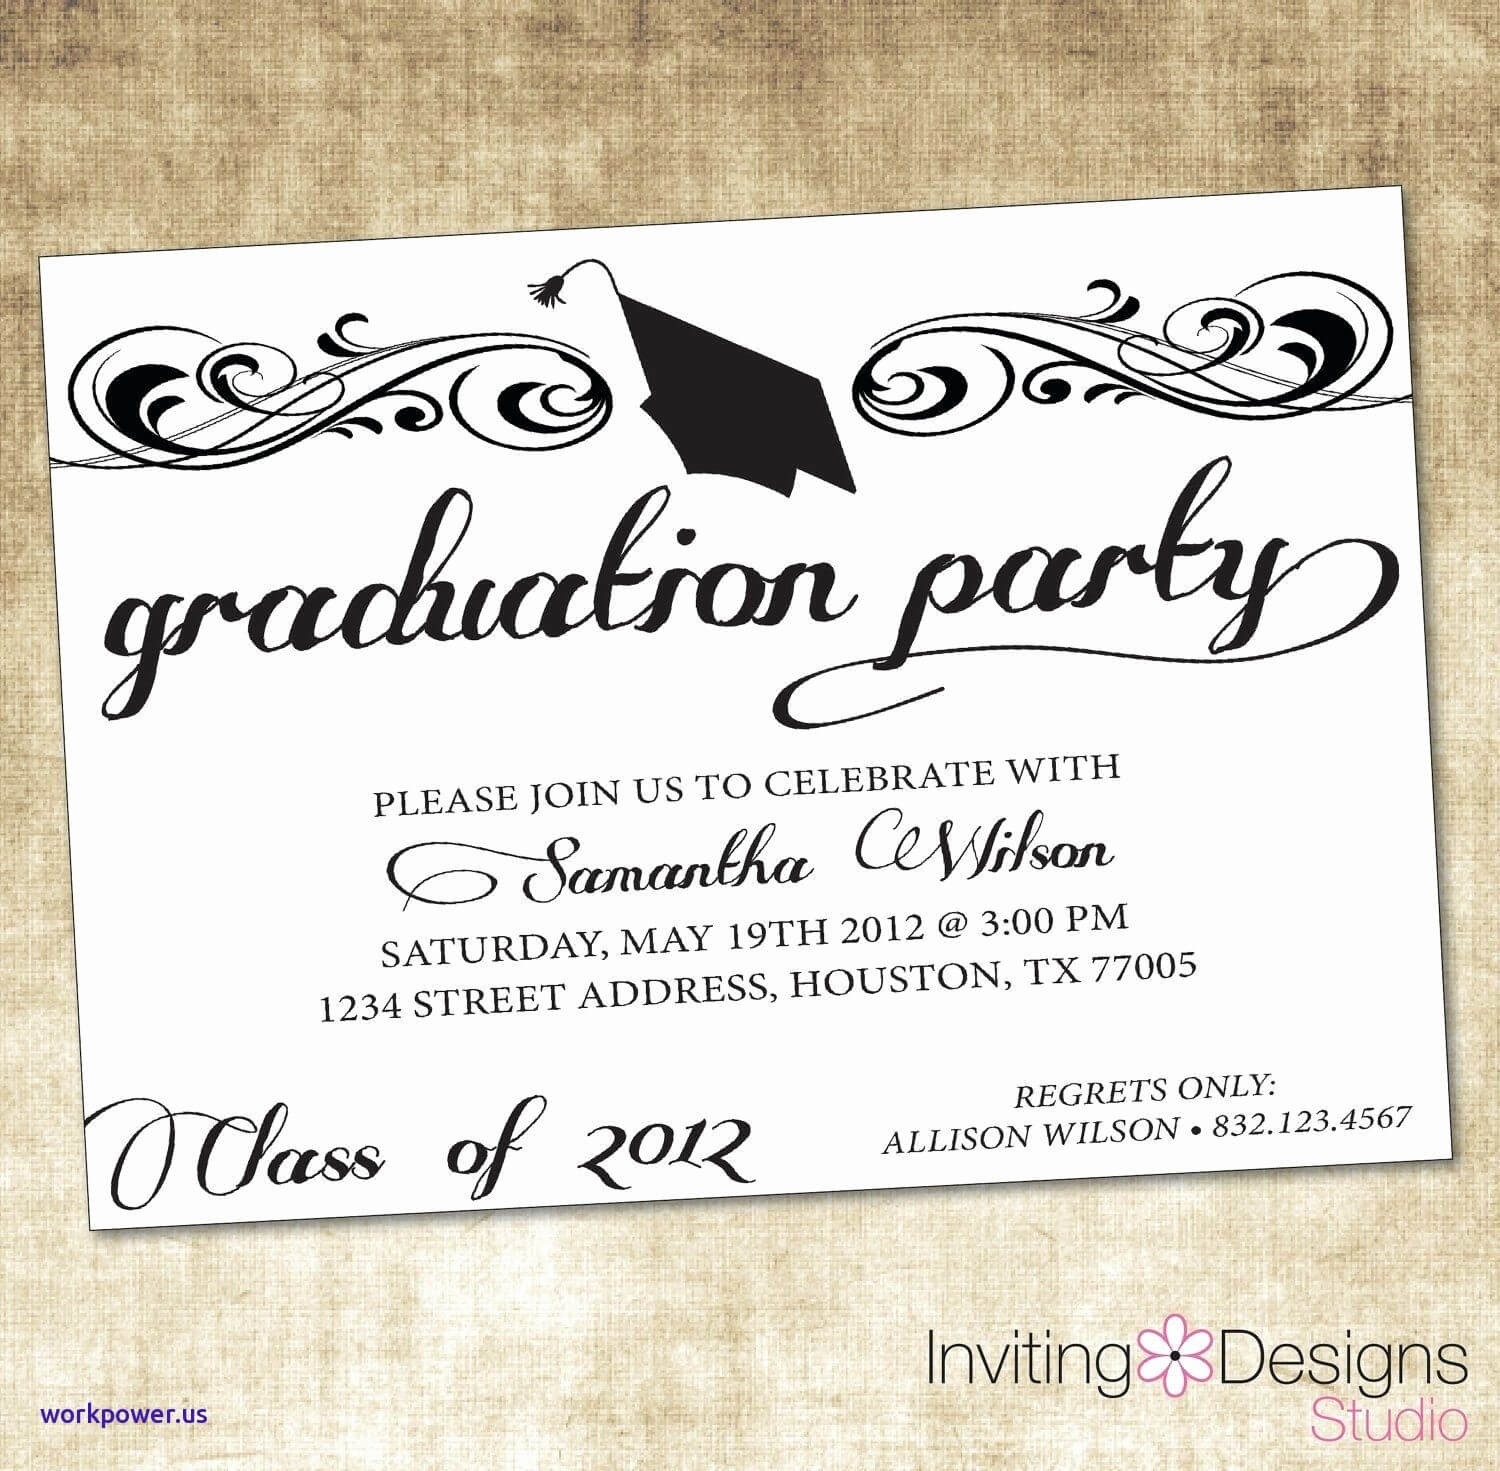 011 Party Invitations Template Word Ideas Graduation Pertaining To Graduation Invitation Templates Microsoft Word